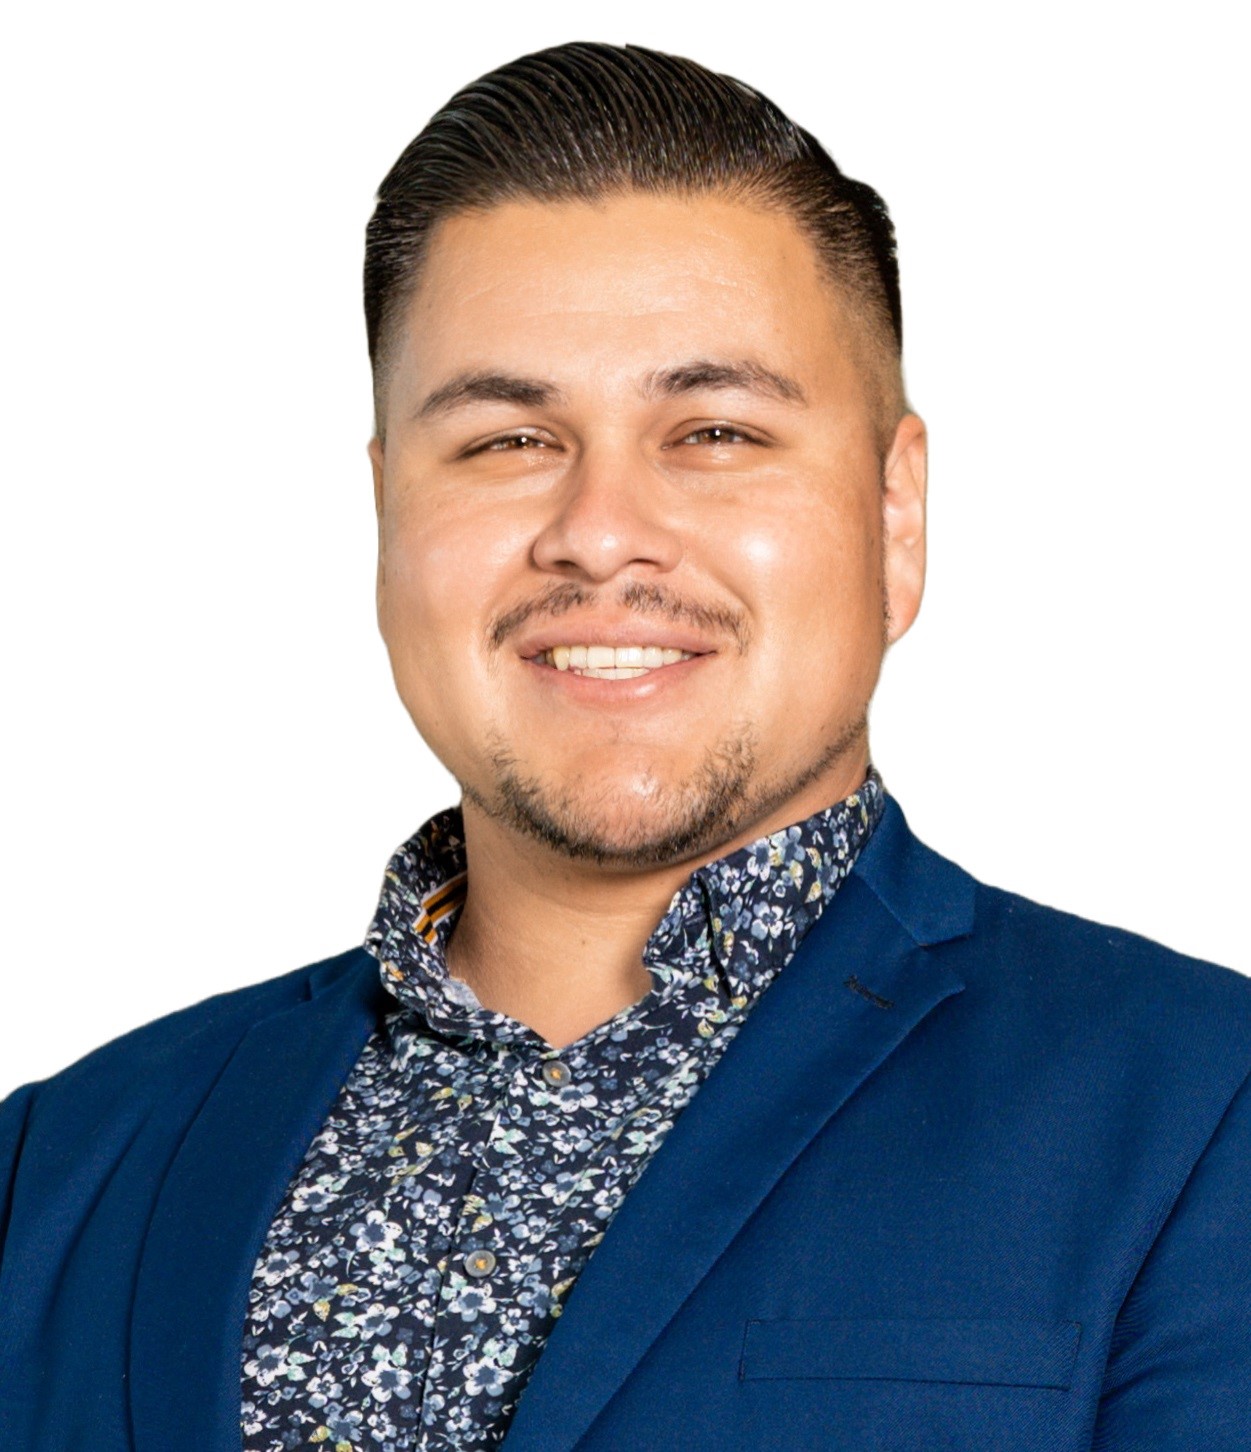 Rudy is the Director of Strategic Initiatives at Price Philanthropies. His experience working in the local and federal government, including the office of then Senator Kamala Harris, connects community efforts and policy priorities. He joined the Aaron Price Fellows Program in 2021.